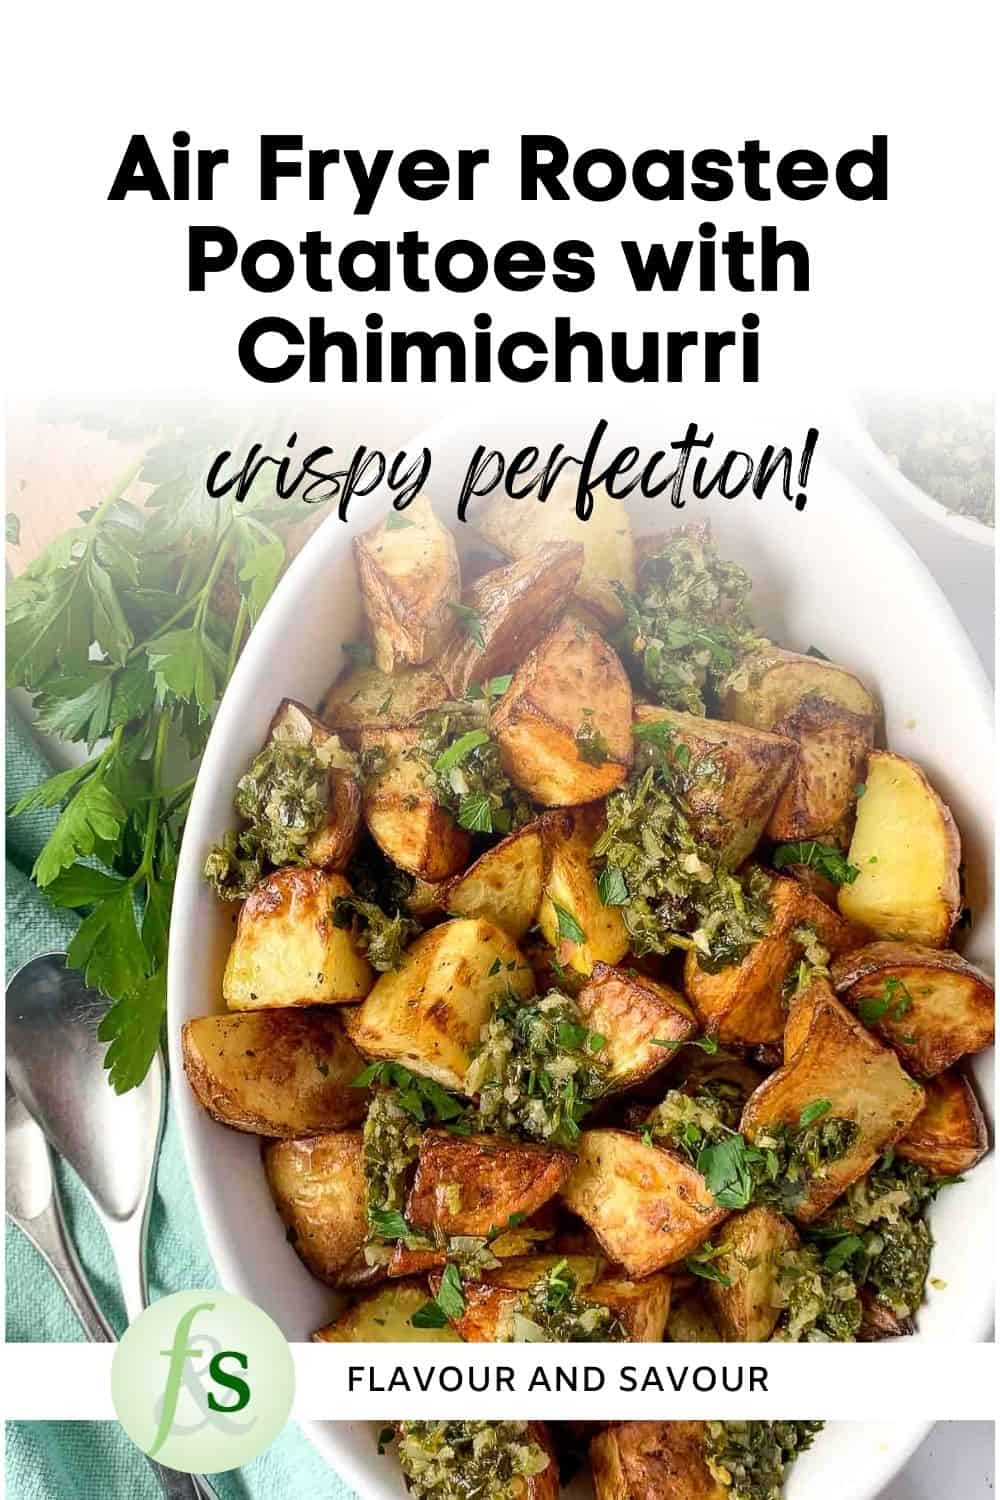 Image with text overlay for Air Fryer Crispy Roast Potatoes with Chimichurri.